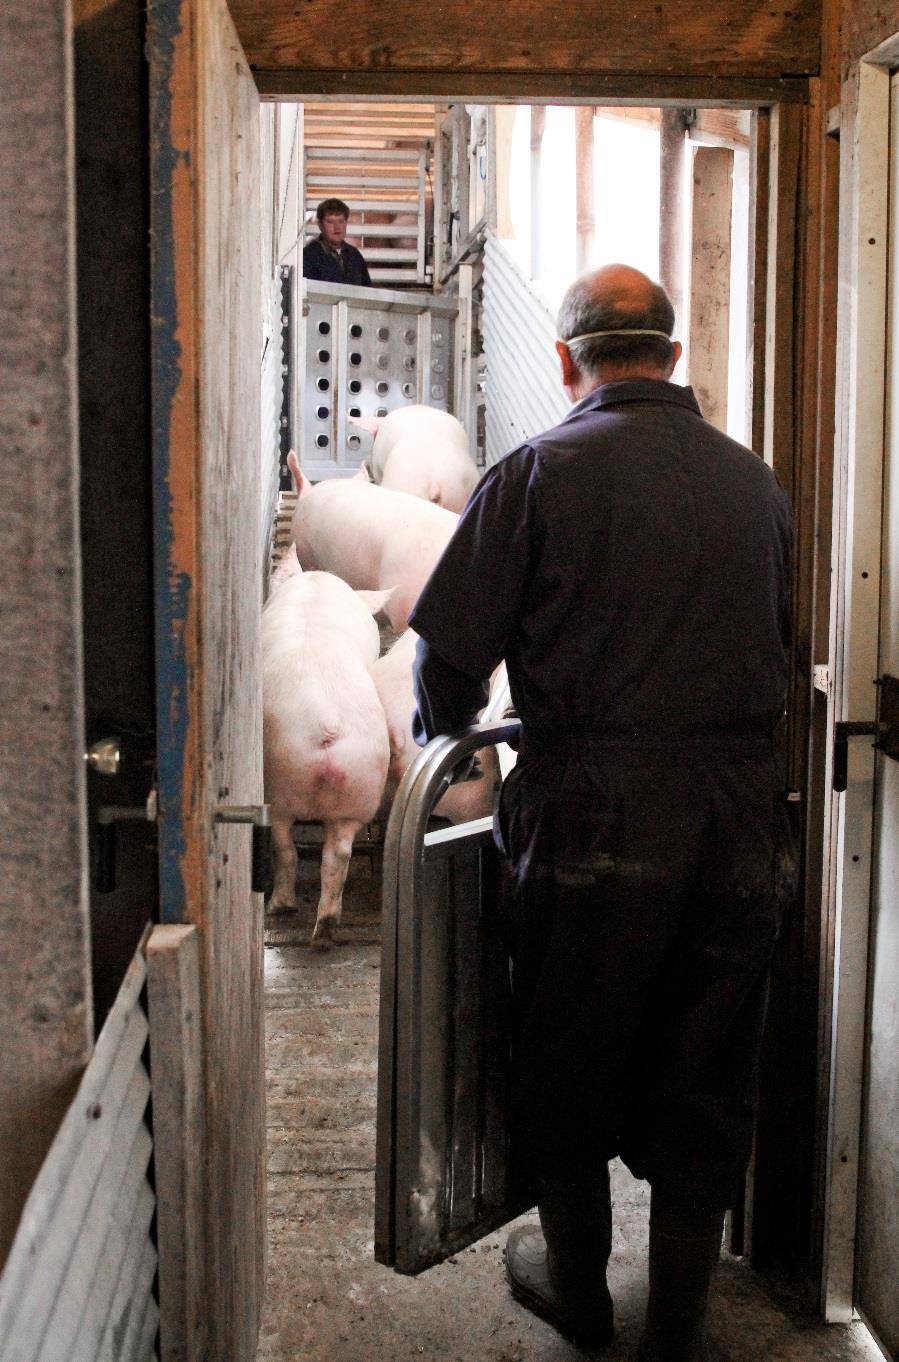 Watch for cues that pigs are becoming stressed under your pressure Be observant of